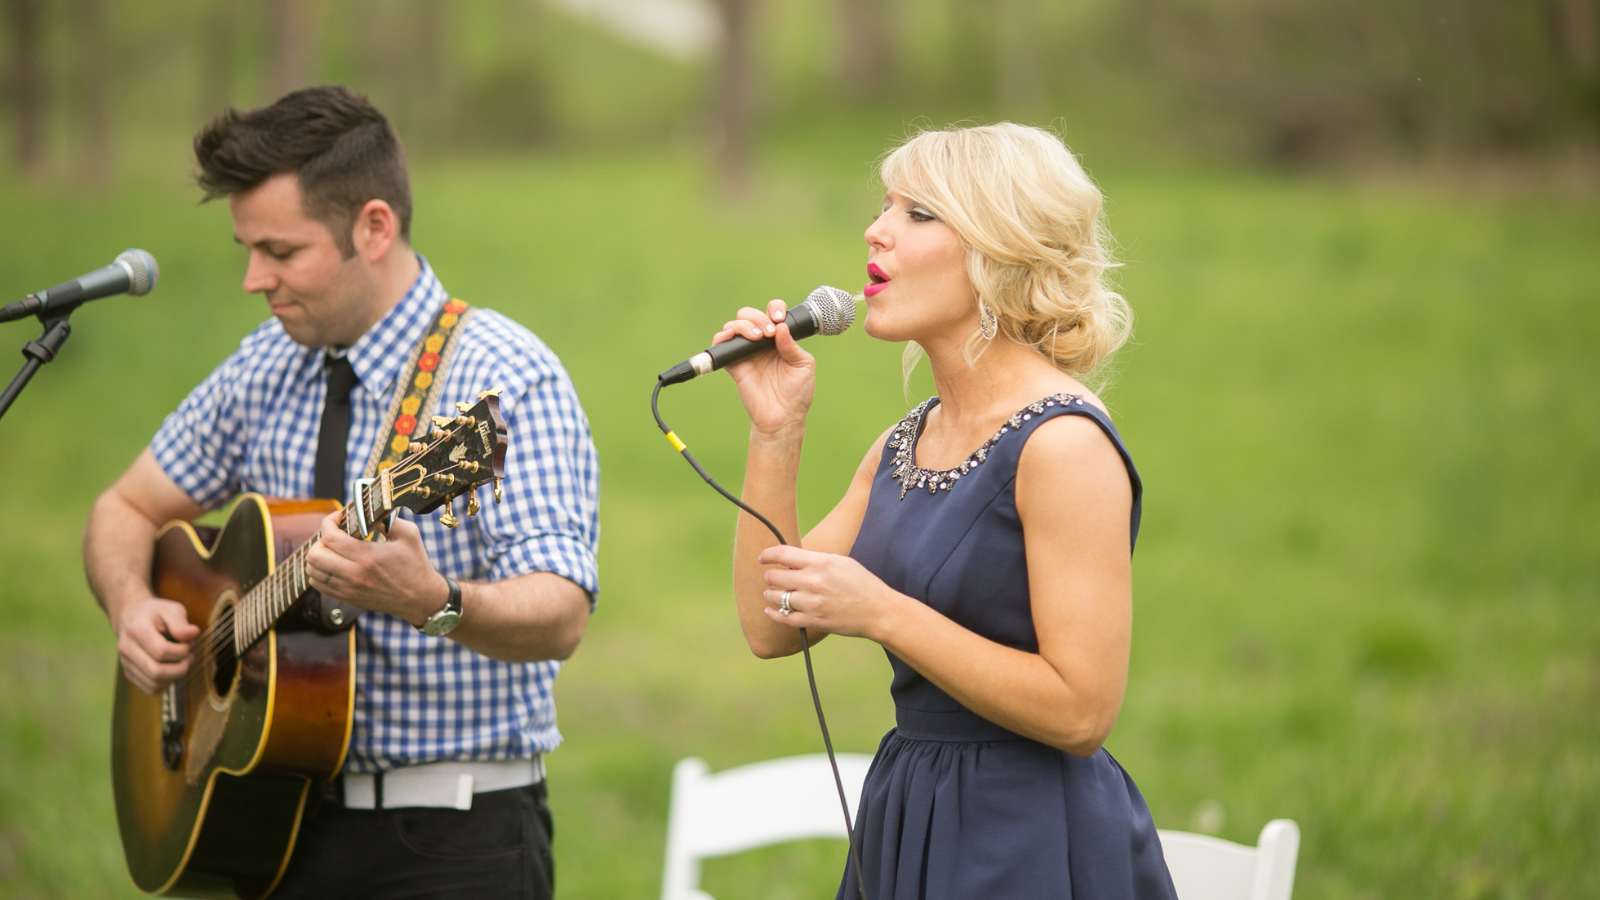 A woman singing next to a man playing a guitar.